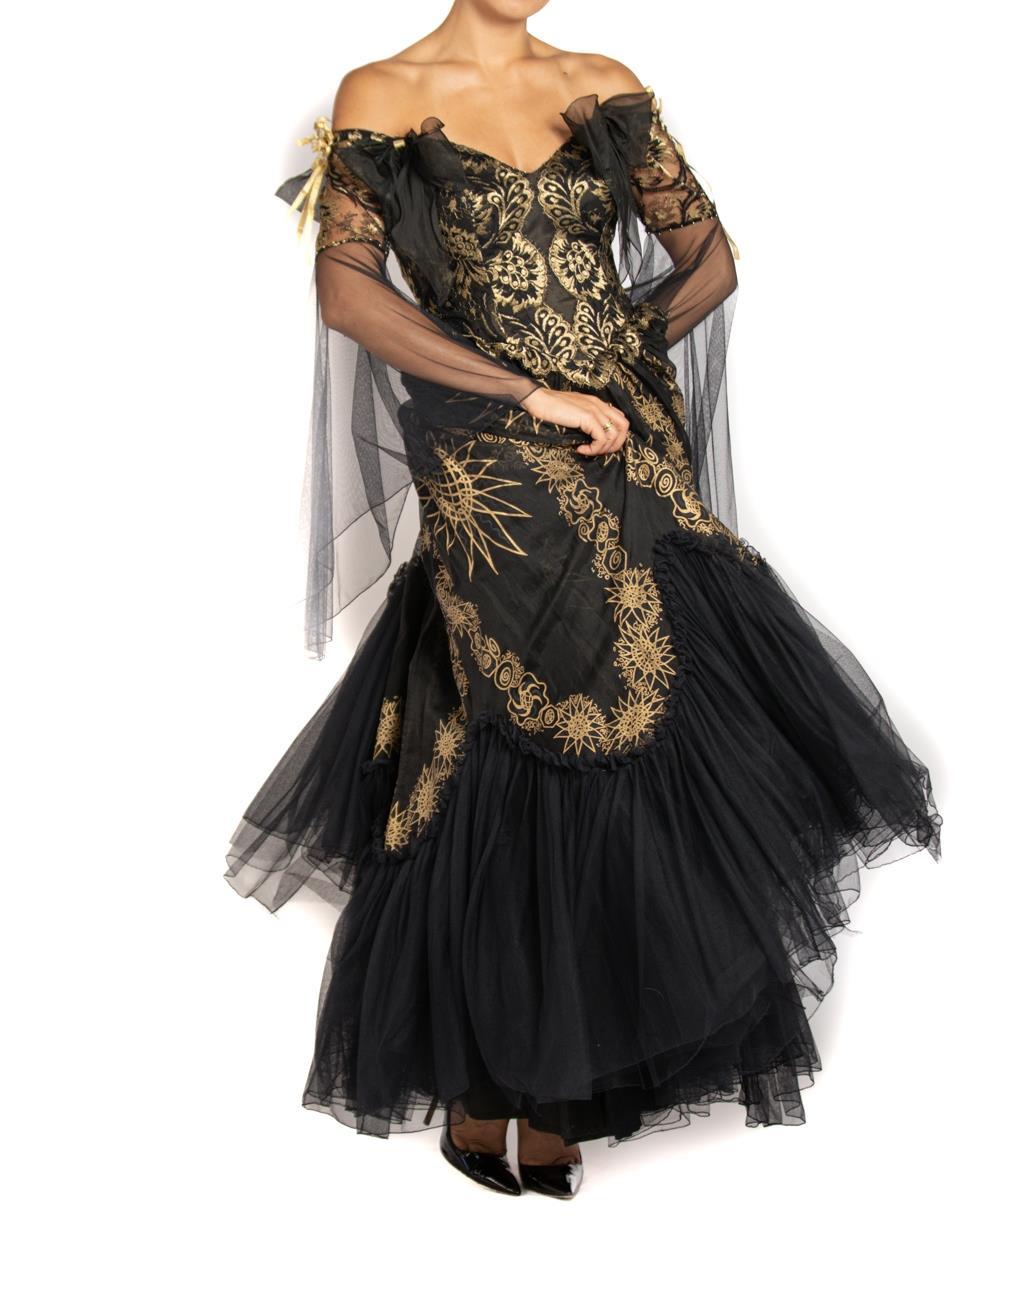 1980S ZANDRA RHODES Black & Gold Lace Ball Gown For Sale 3